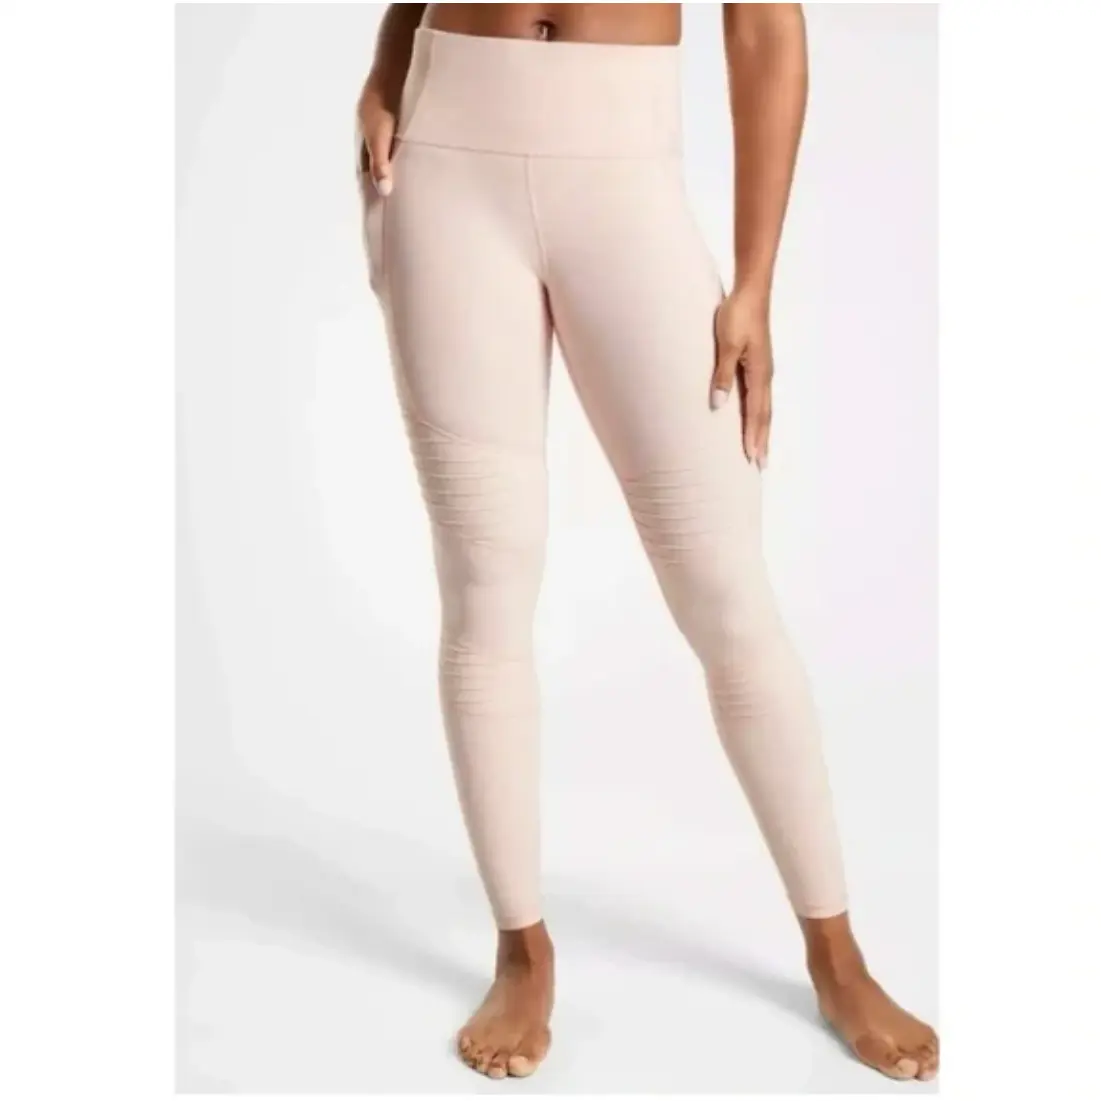 Athleta Inclination Moto Tight Leggings Orchid Pink High Waisted